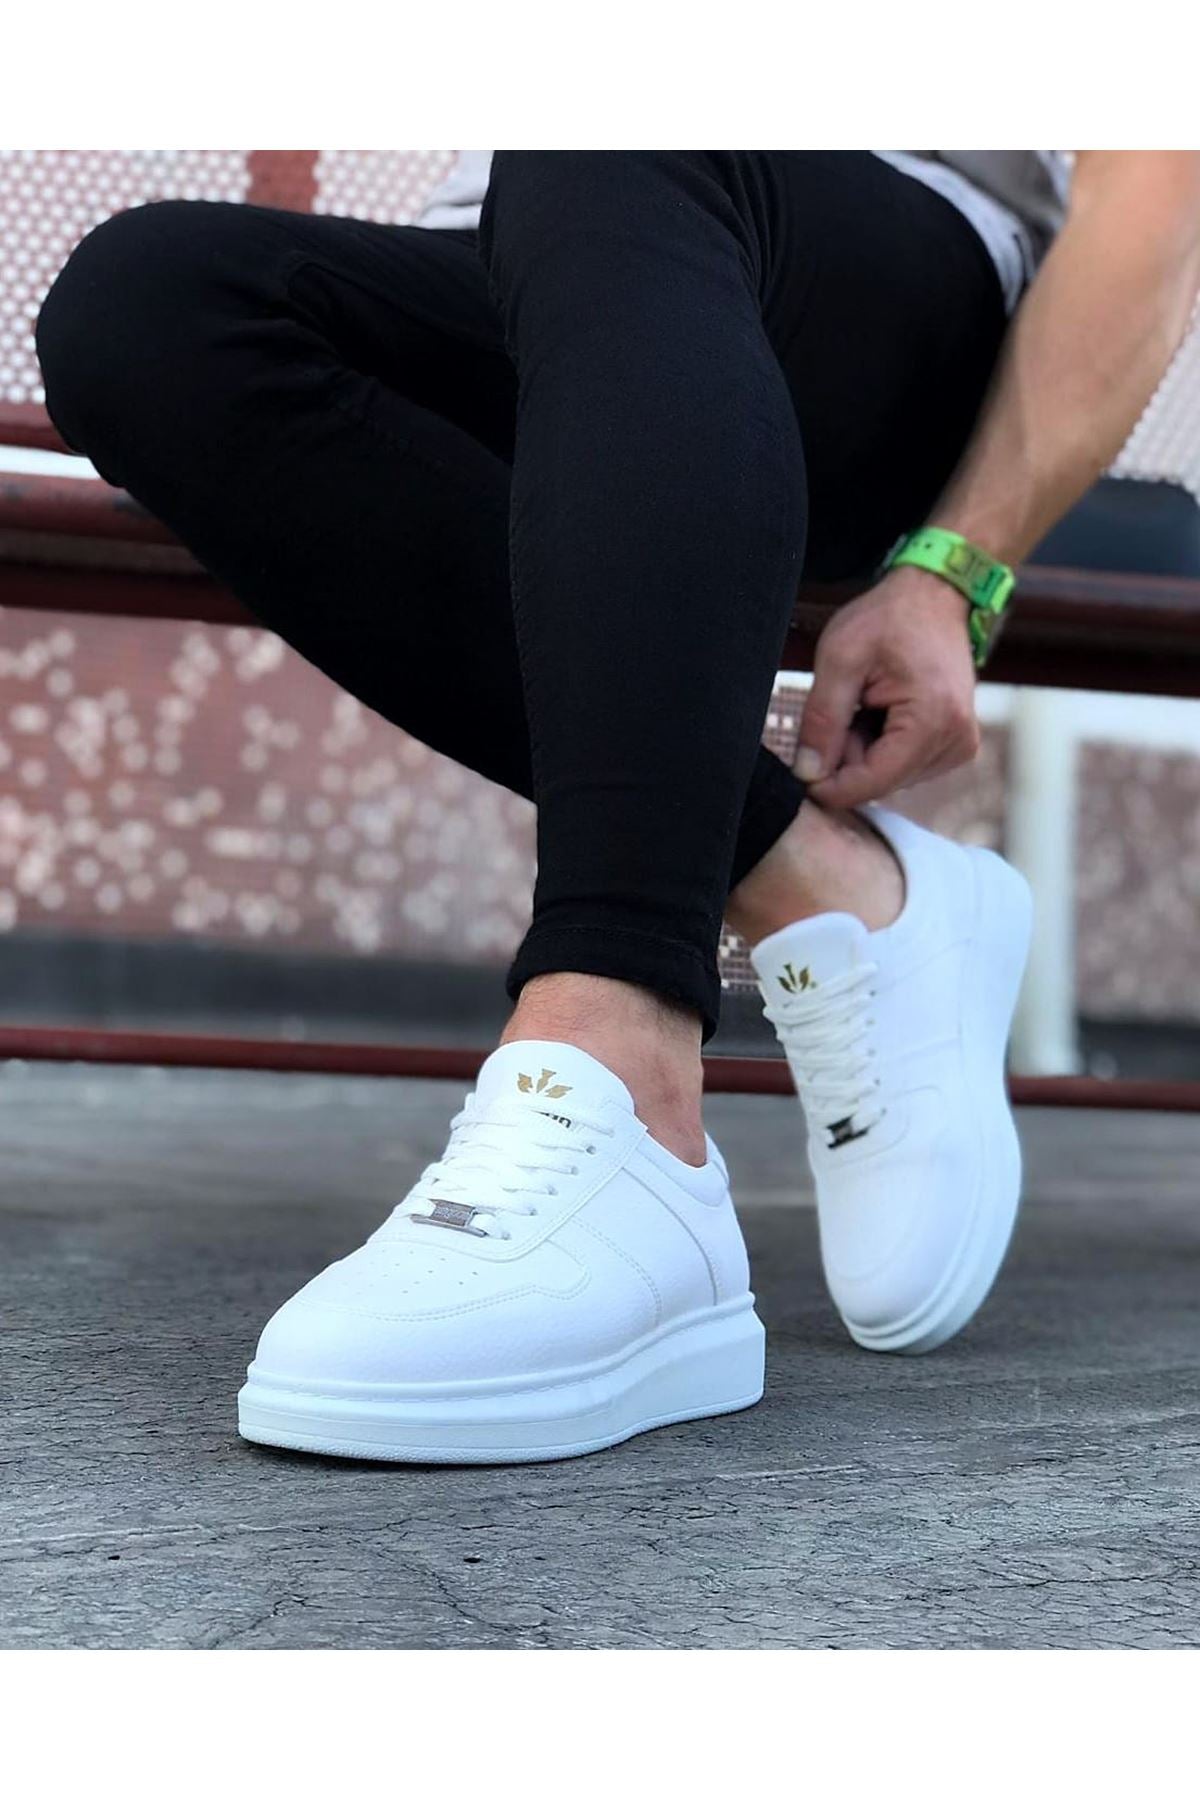 WG011 White Men's Casual Shoes - STREETMODE™